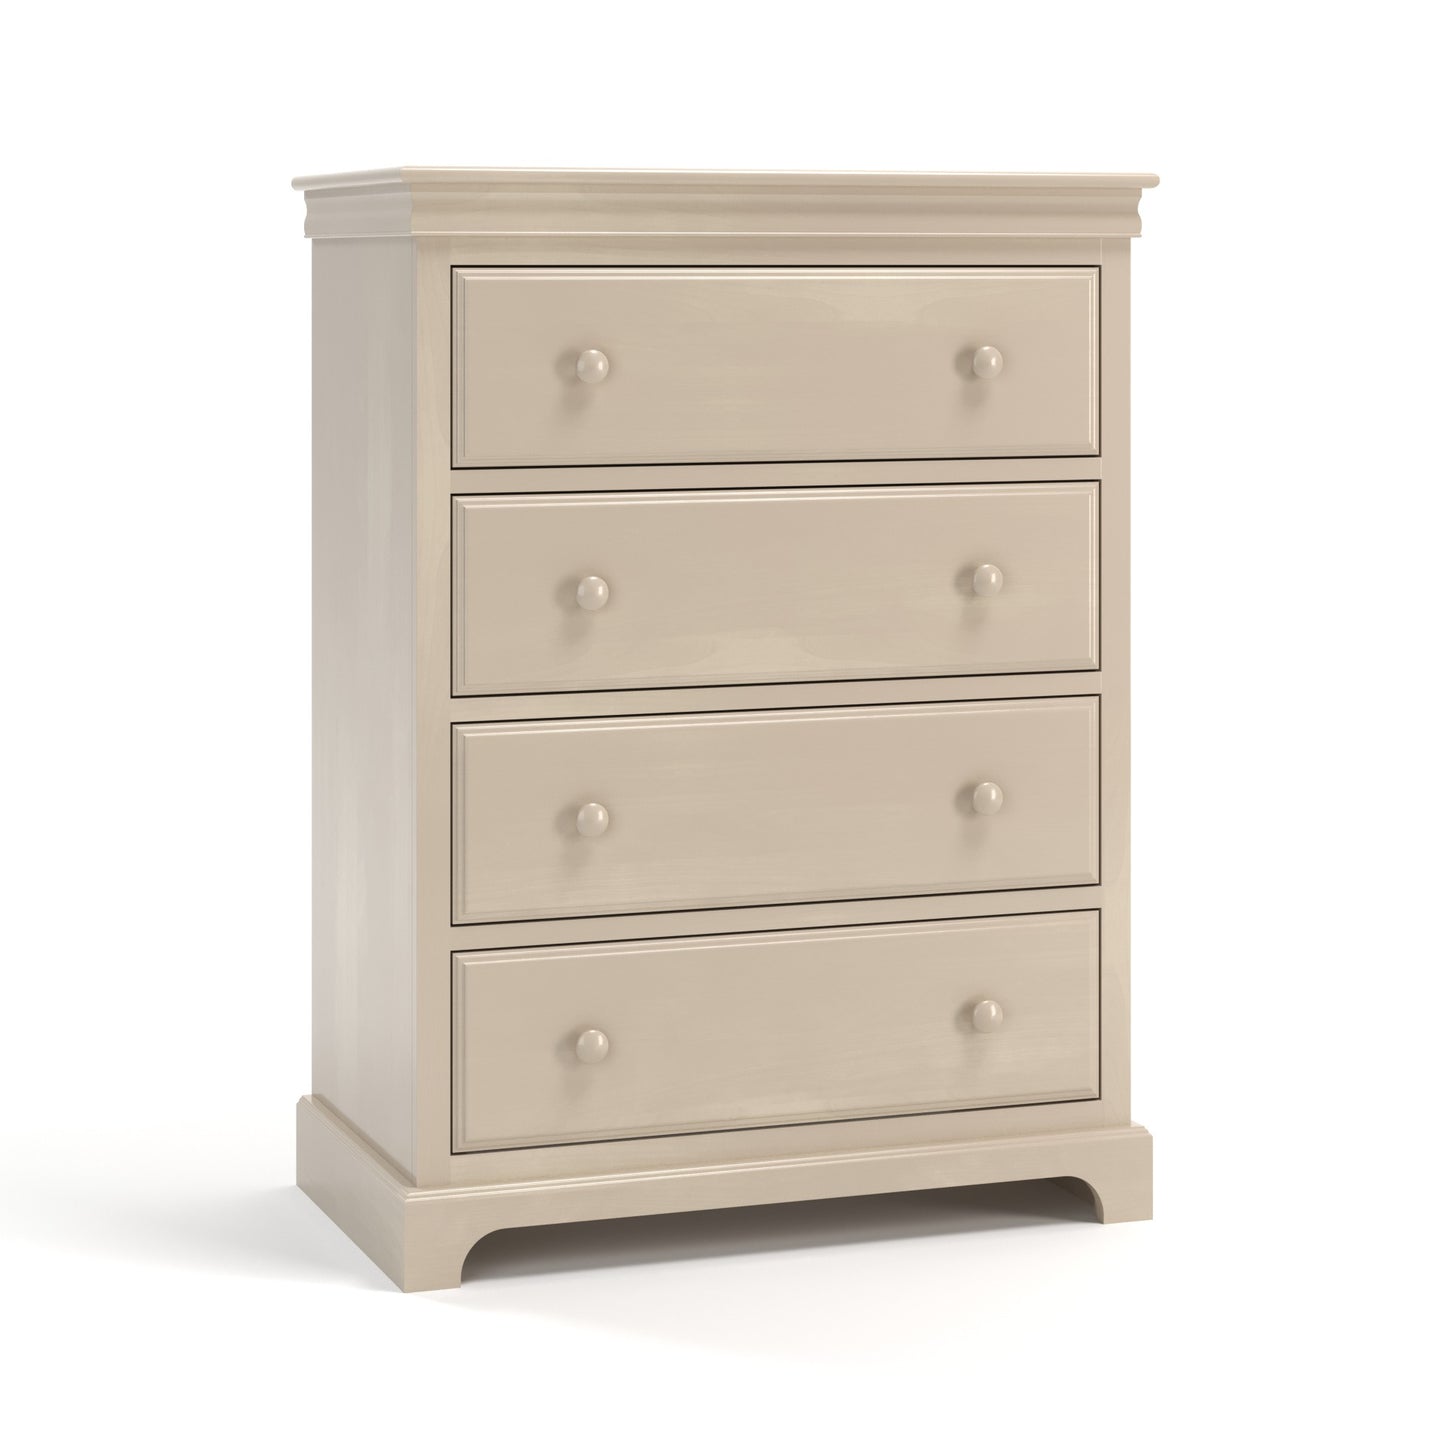 Acadia Madison Chest is built in birch and features crown moulding and four drawers. Pictured in Sandstone finish.